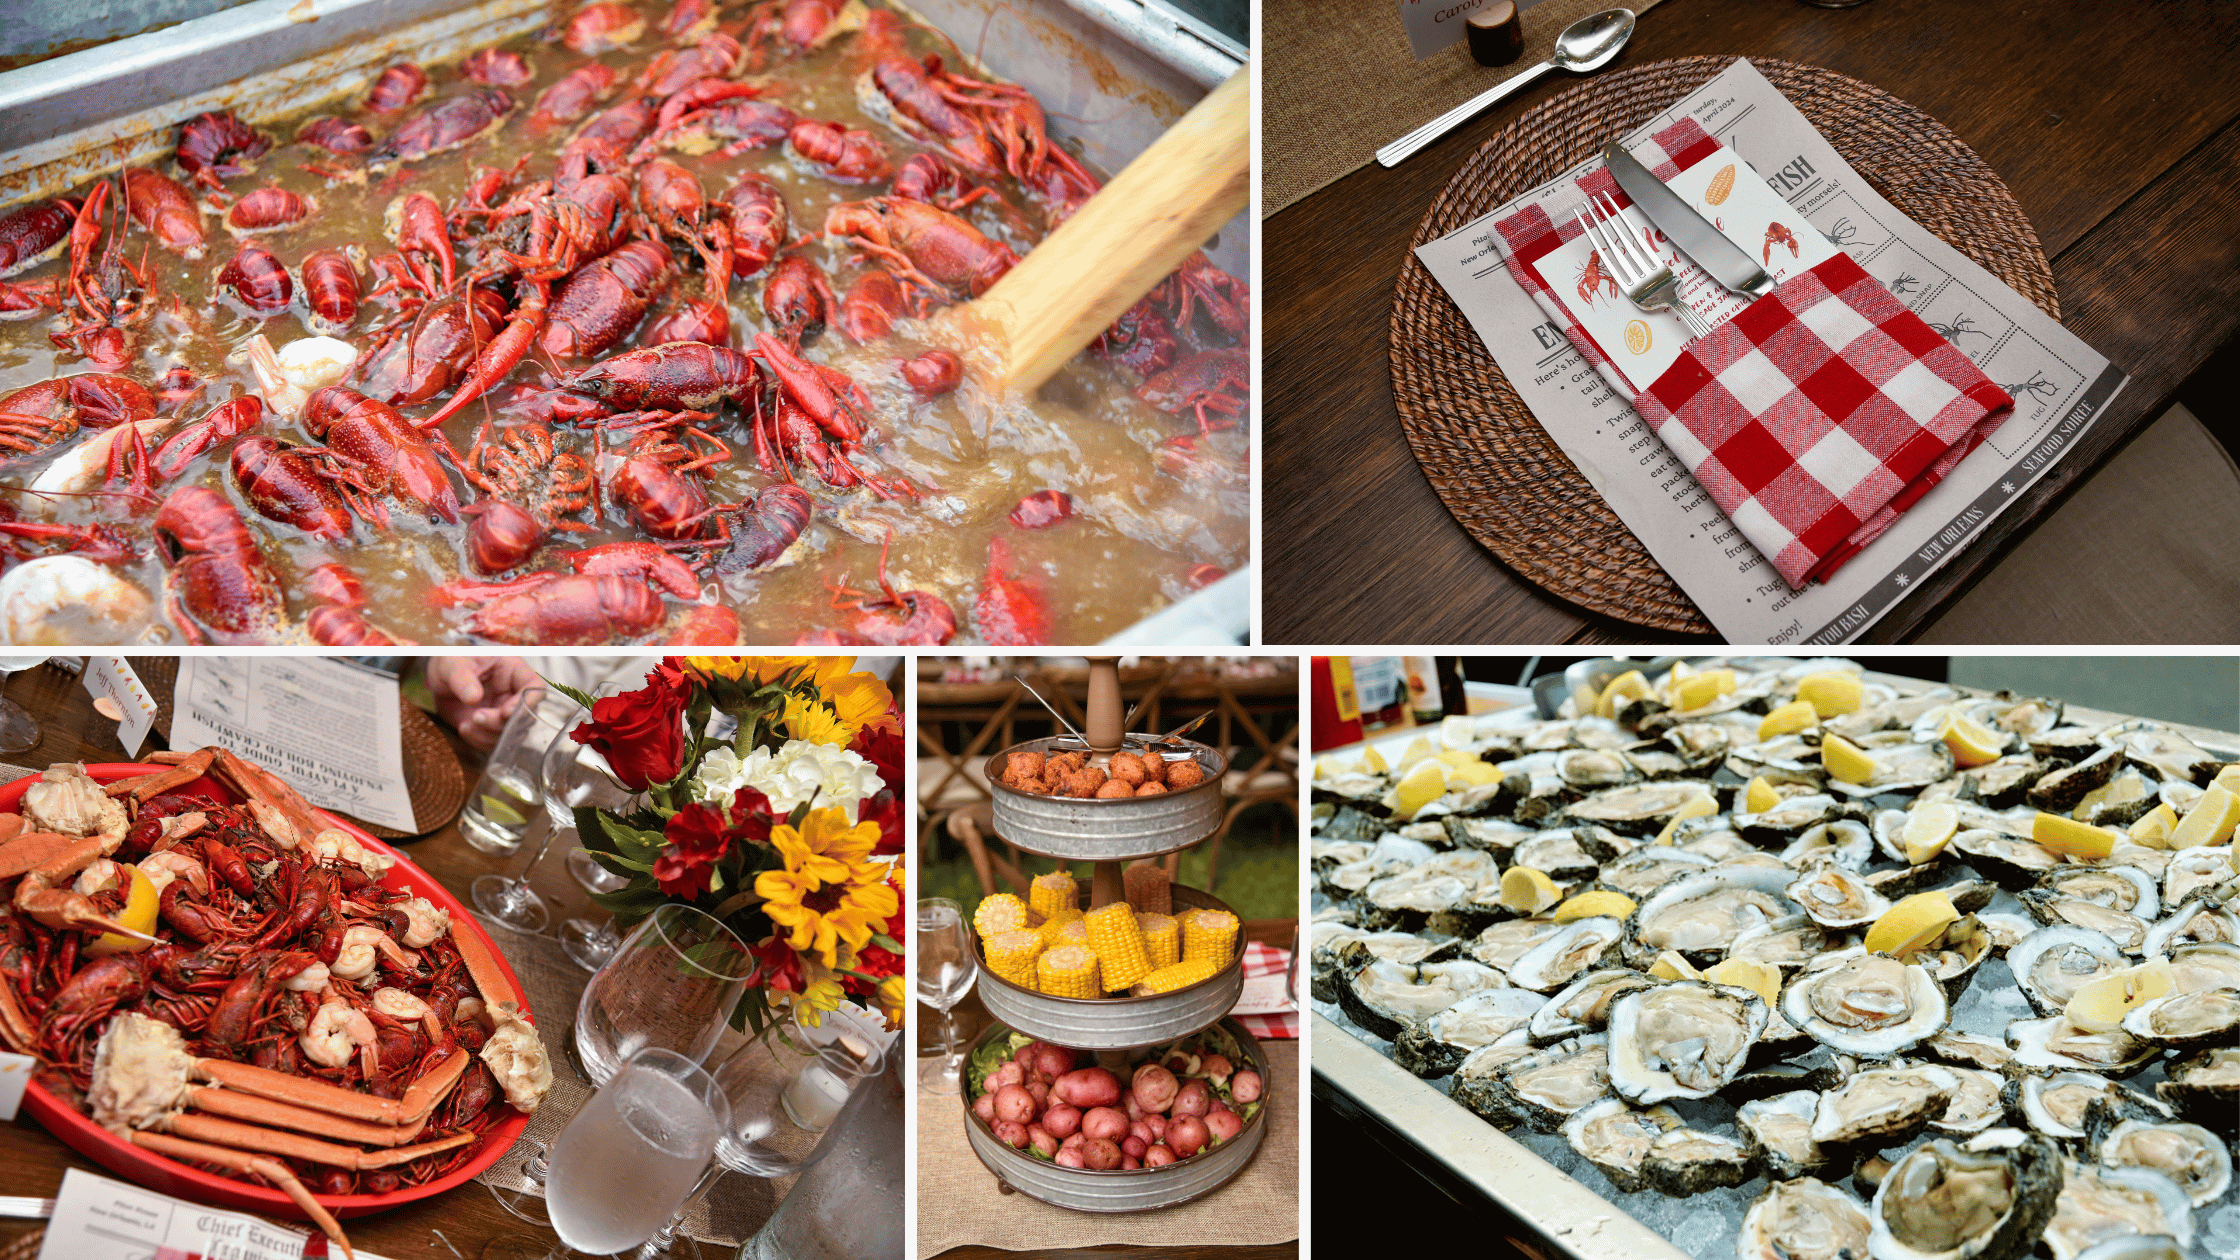 Hosts Global | Native Culinary delights as crawfish and oysters in New Orleans